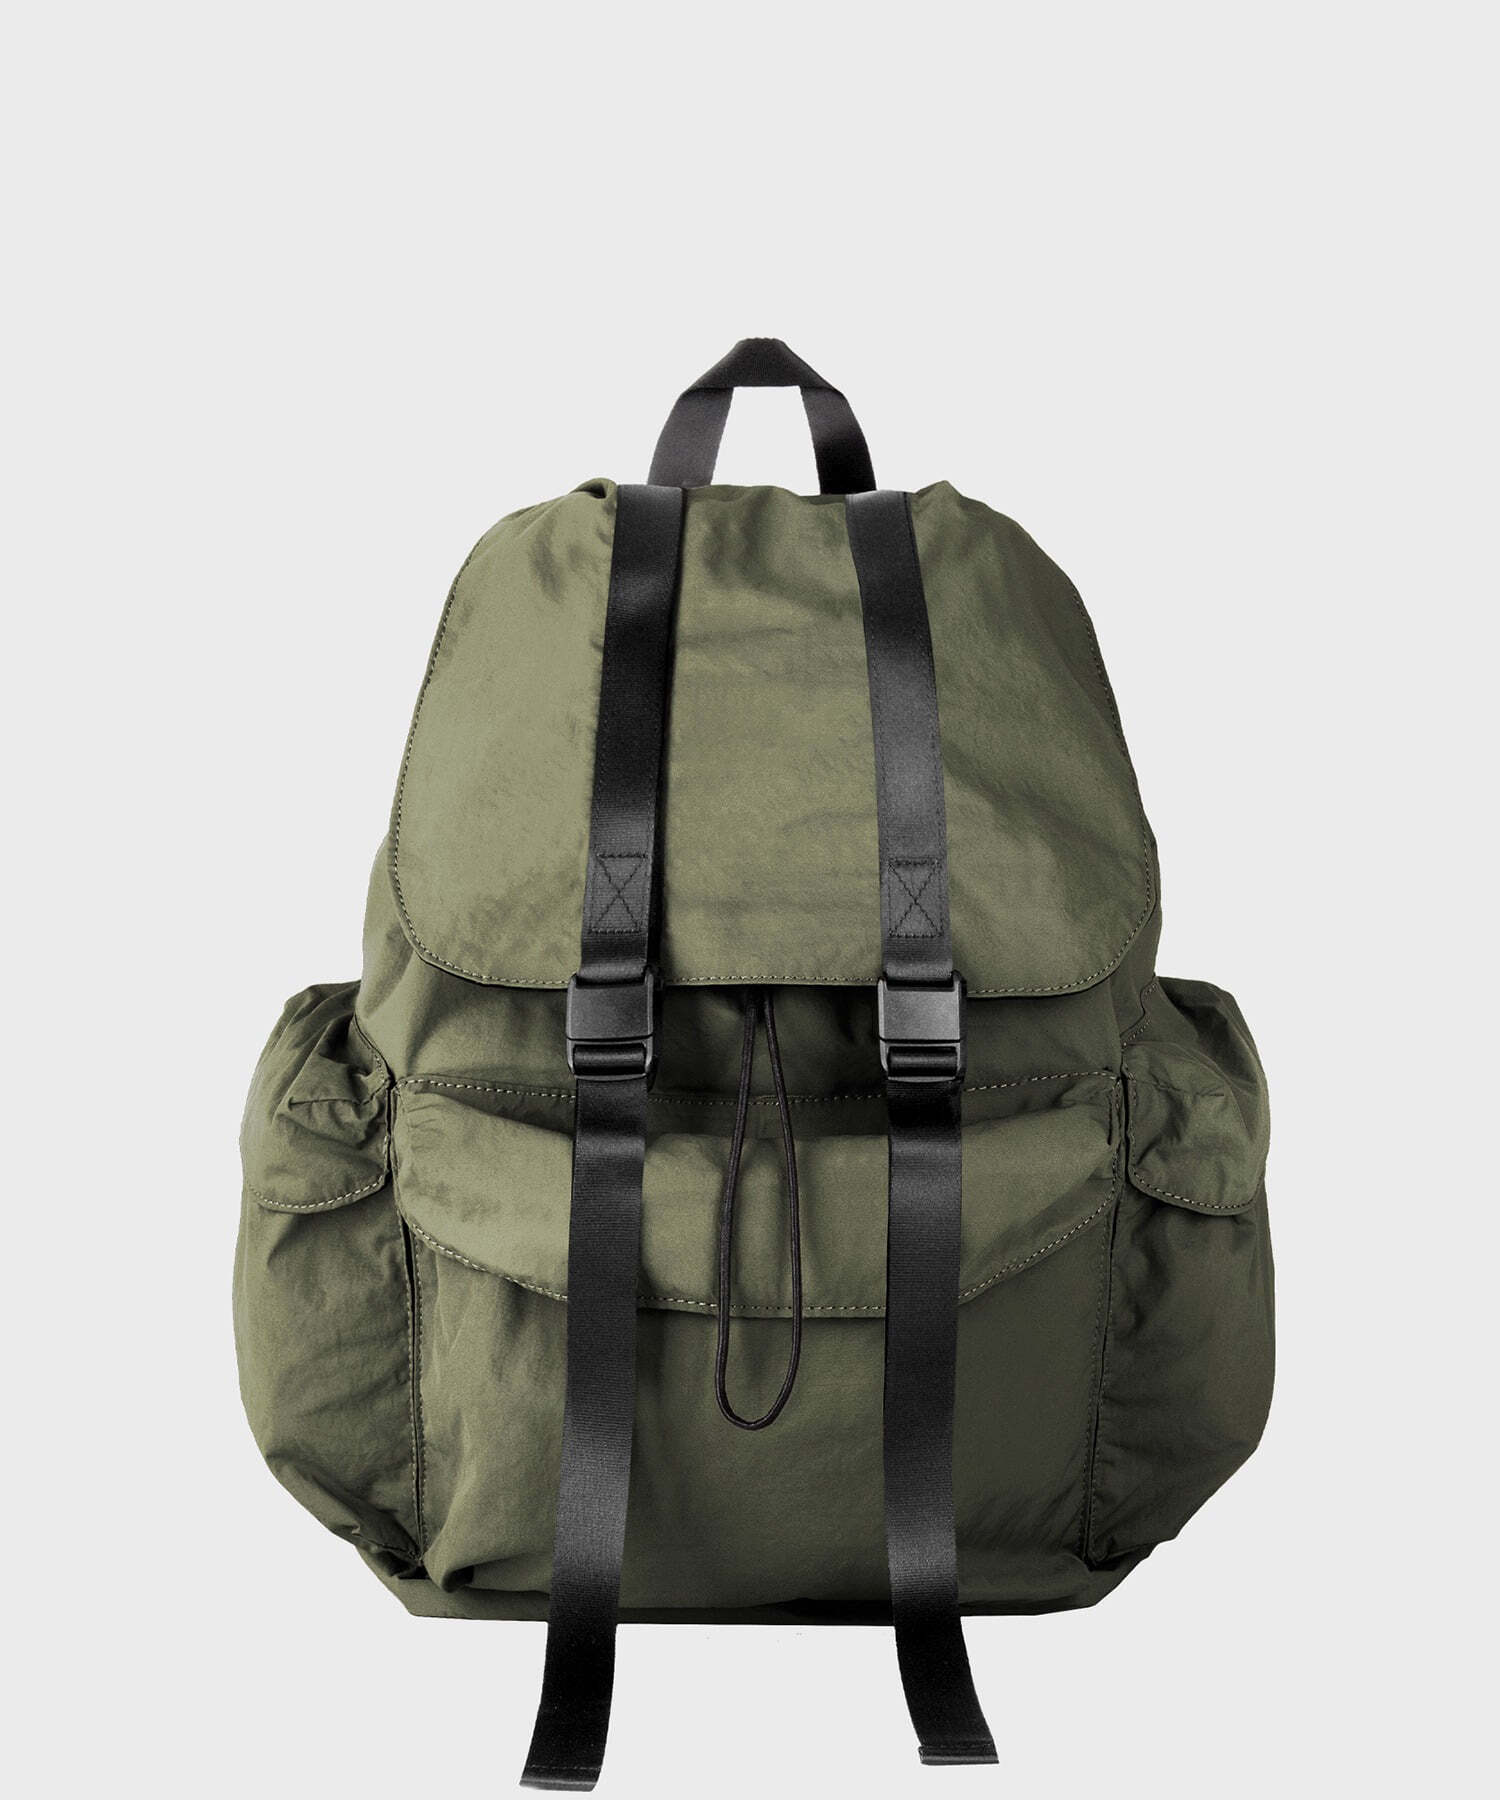 BOHEMIAN BACKPACK (OLIVE DRAB) / RECYCLED